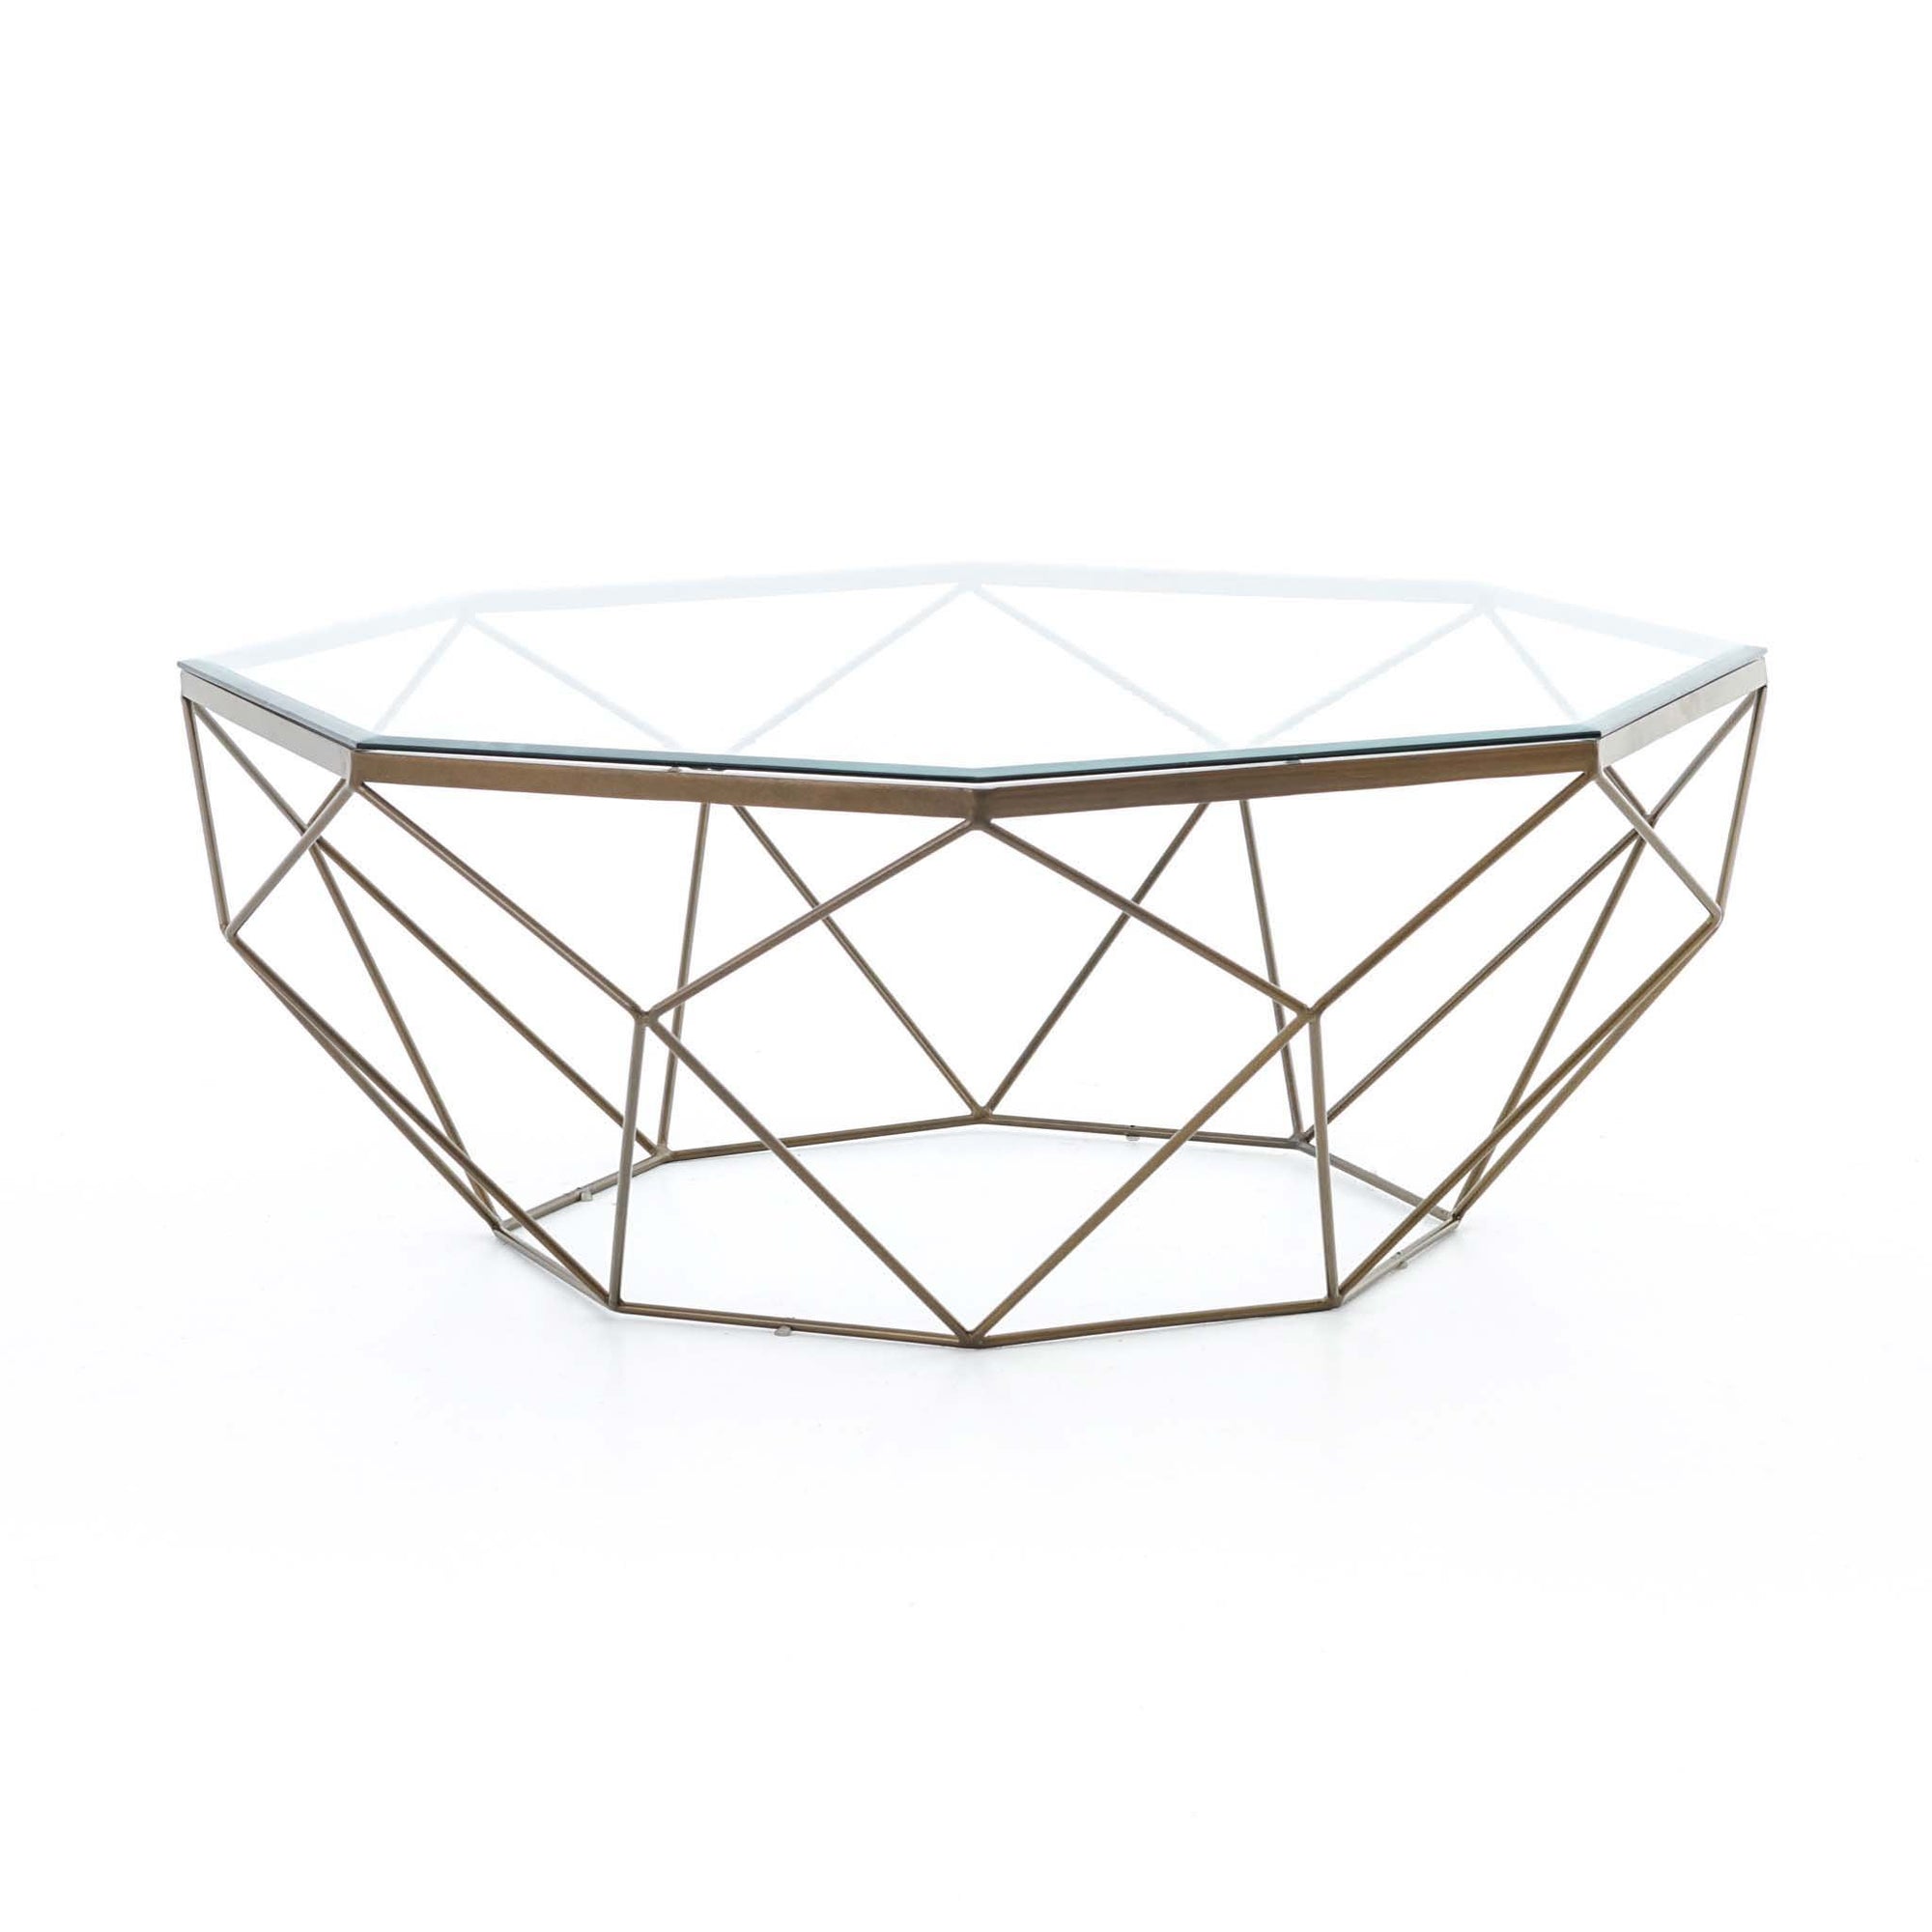 MODTEMPO Signature-Marlow Geometric Coffee Table-Antique Brass-Coffee Tables-MODTEMPO